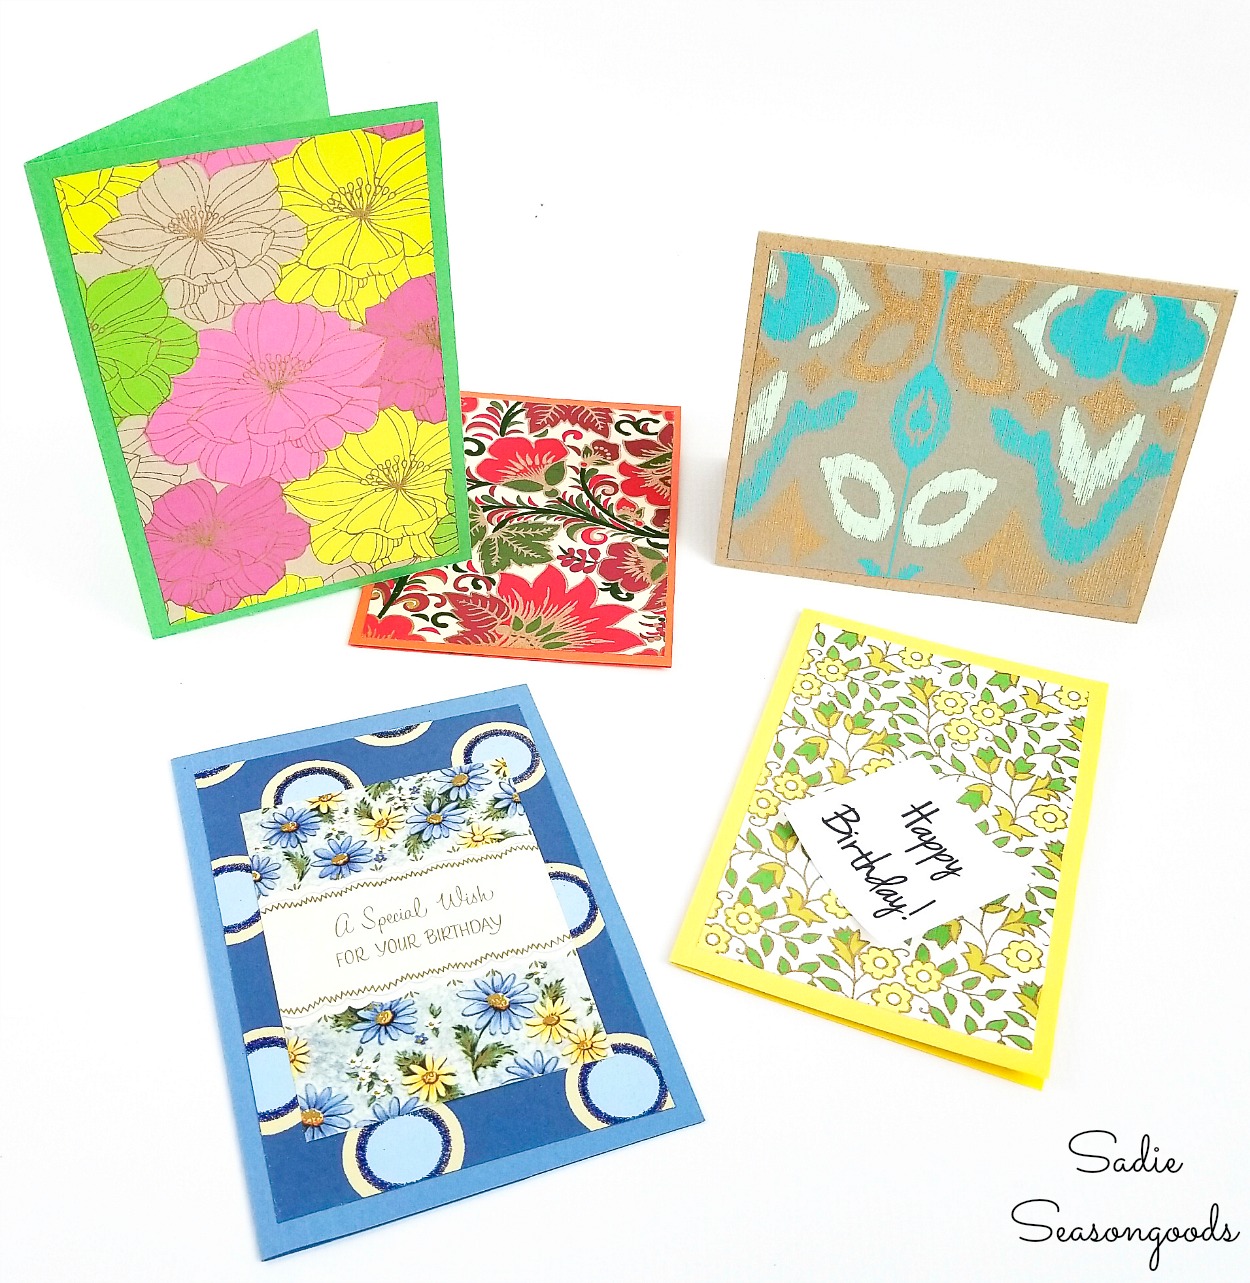 Repurposing the file folders for cardmaking with scrapbooking supplies